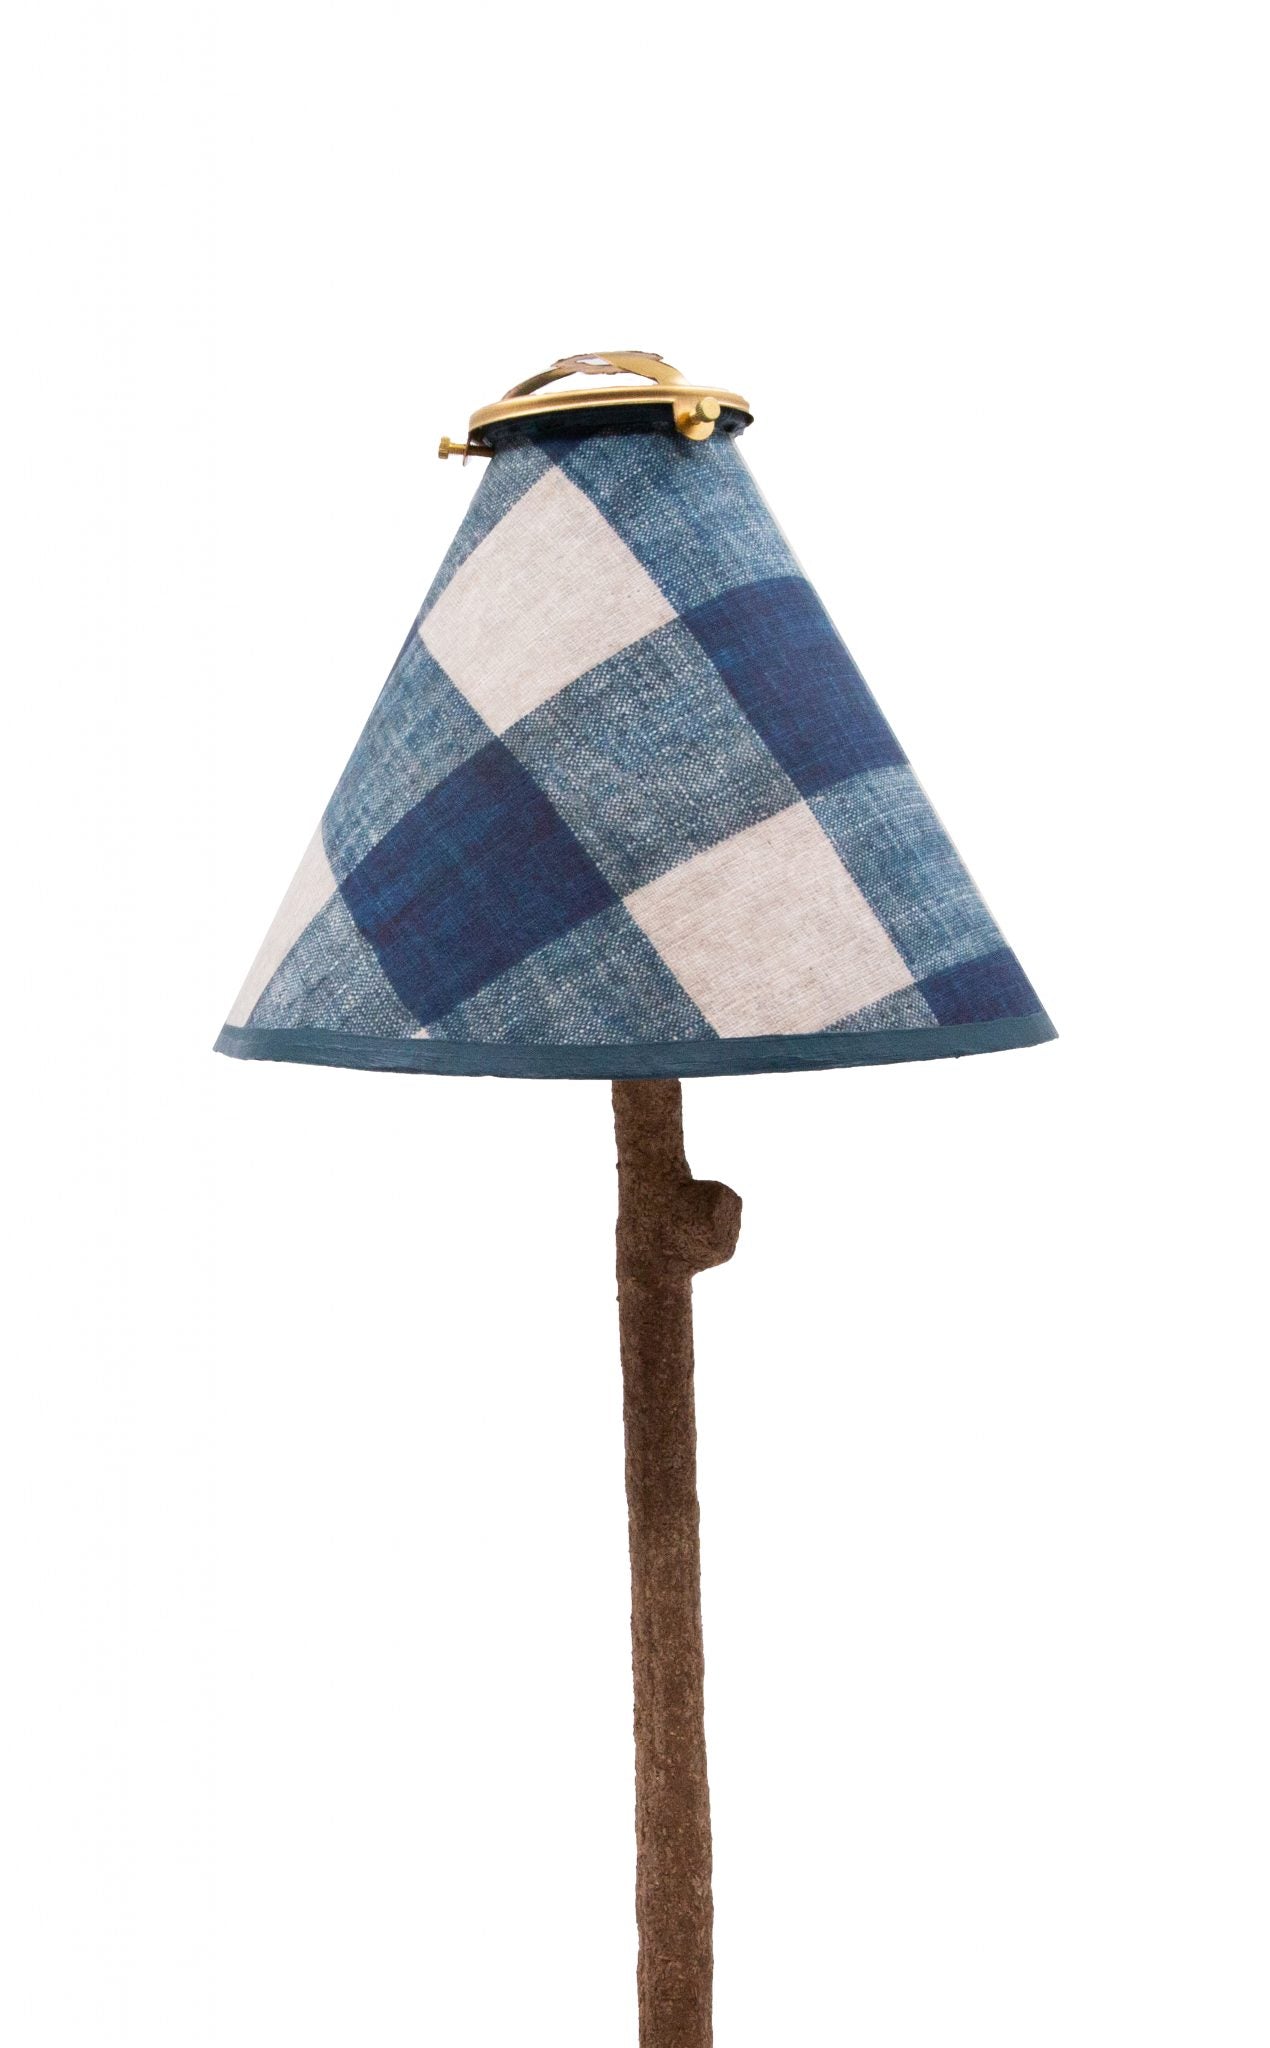 Antoinette Poisson Conical Clip On Lamp Shade in Carreaux Indigo